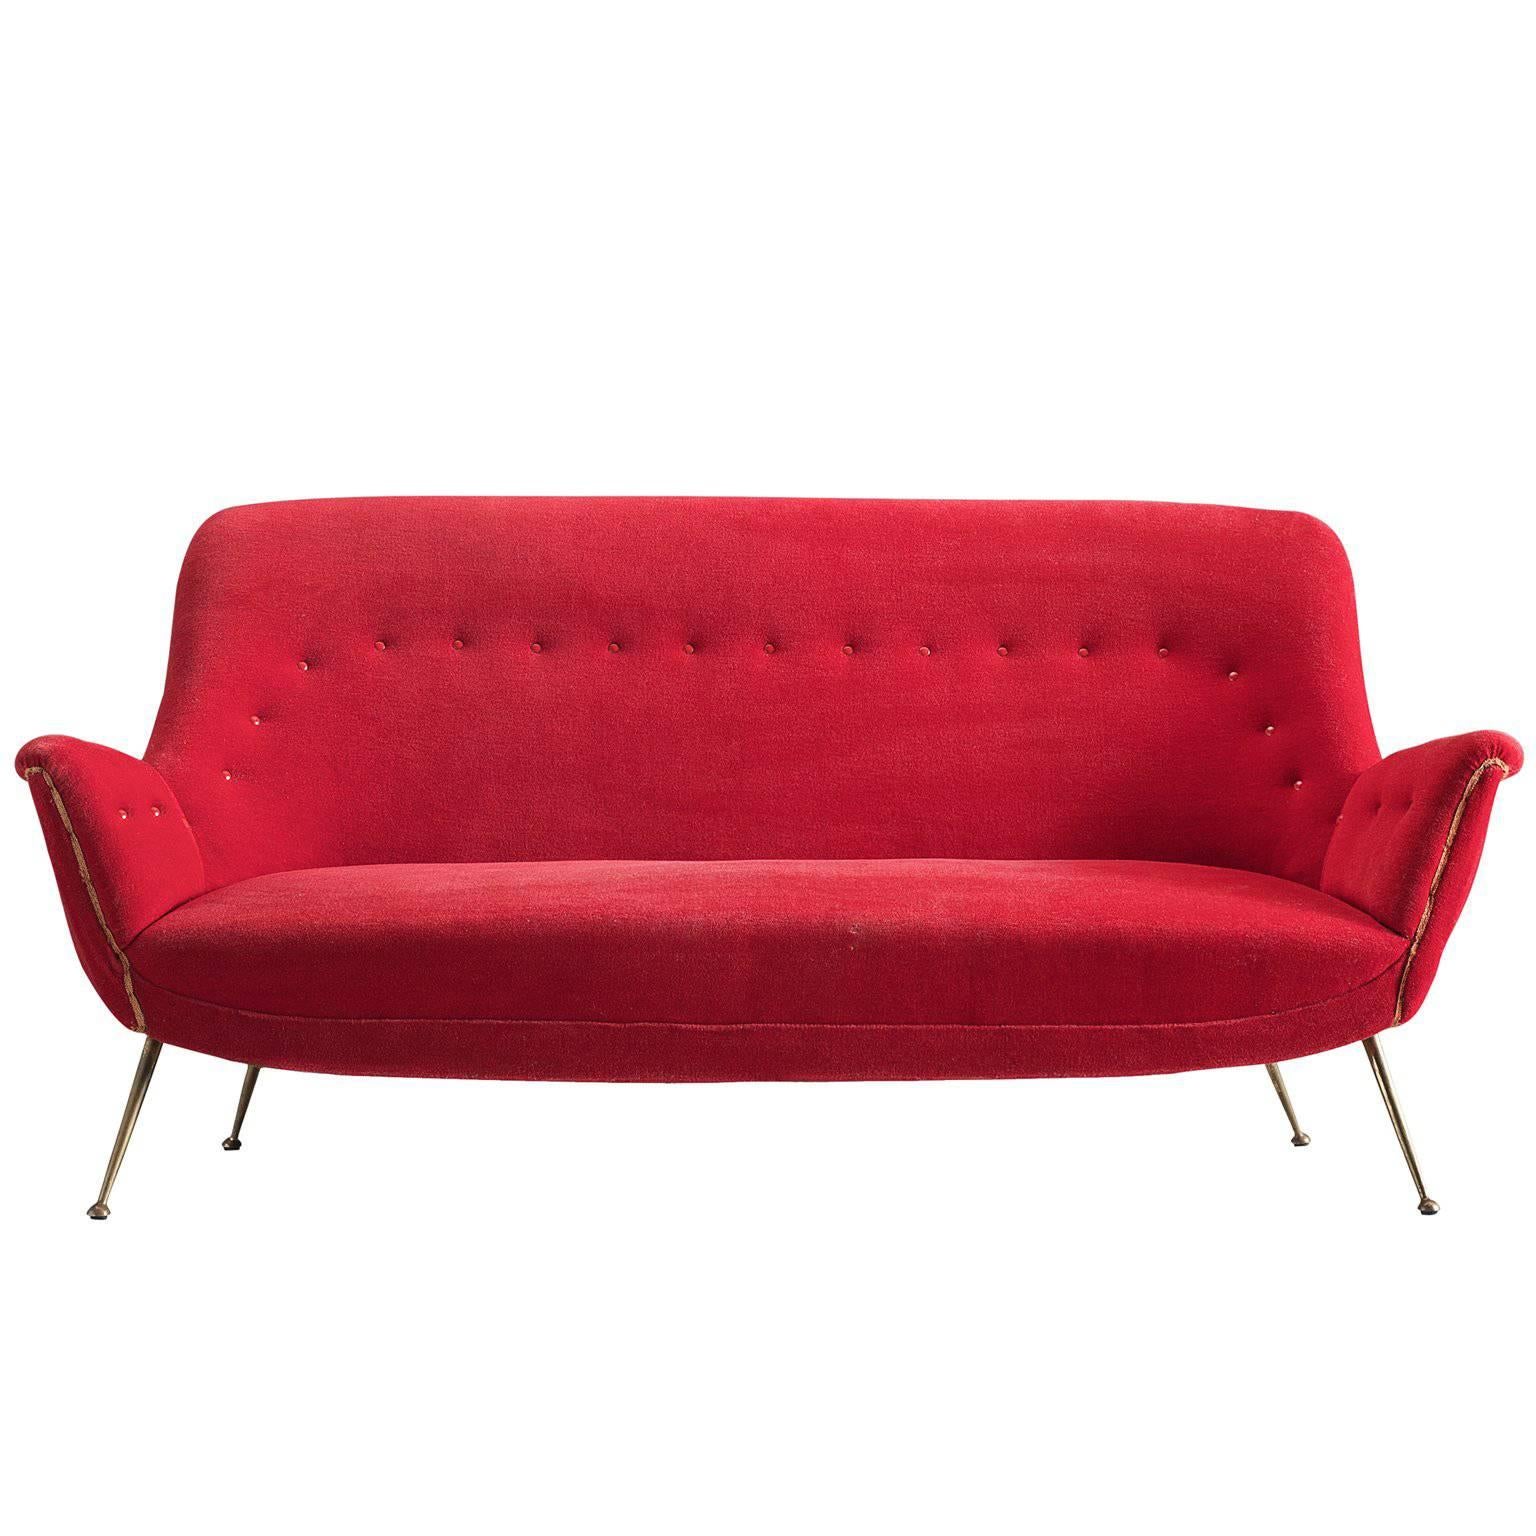 Nice Venetian red Italian lounge set original from the 1950s. 

This set is an iconic example of Italian design from the fifties. Organic and sculptural, this two-and-a-half-seat sofa and two matching lounge chairs are anything but minimalistic.